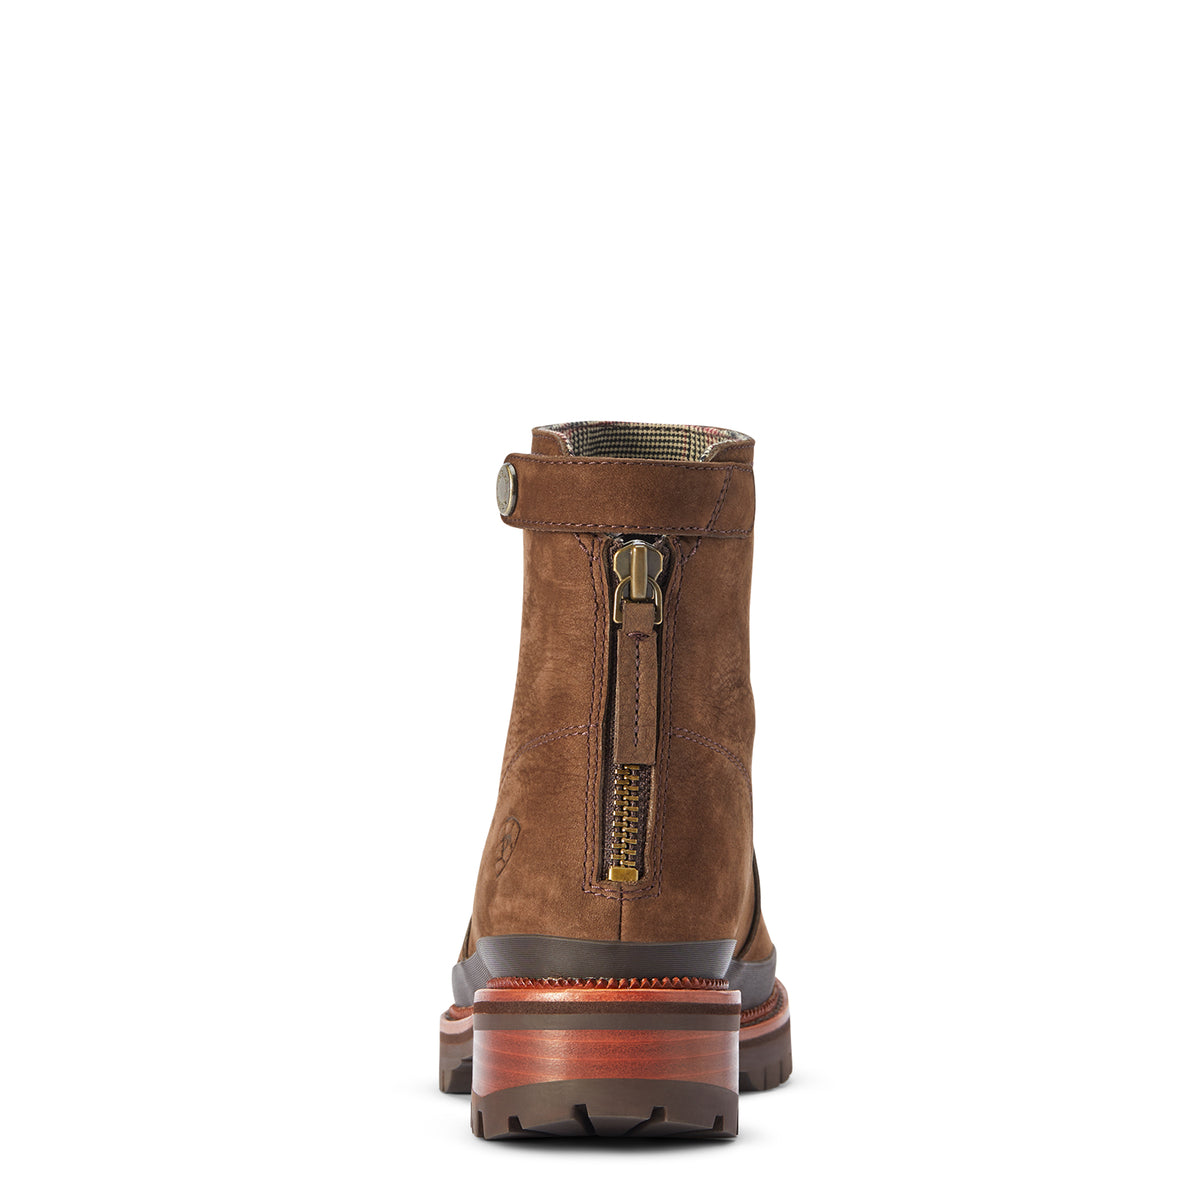 Ariat Womens Leighton H2O Waterproof Boots